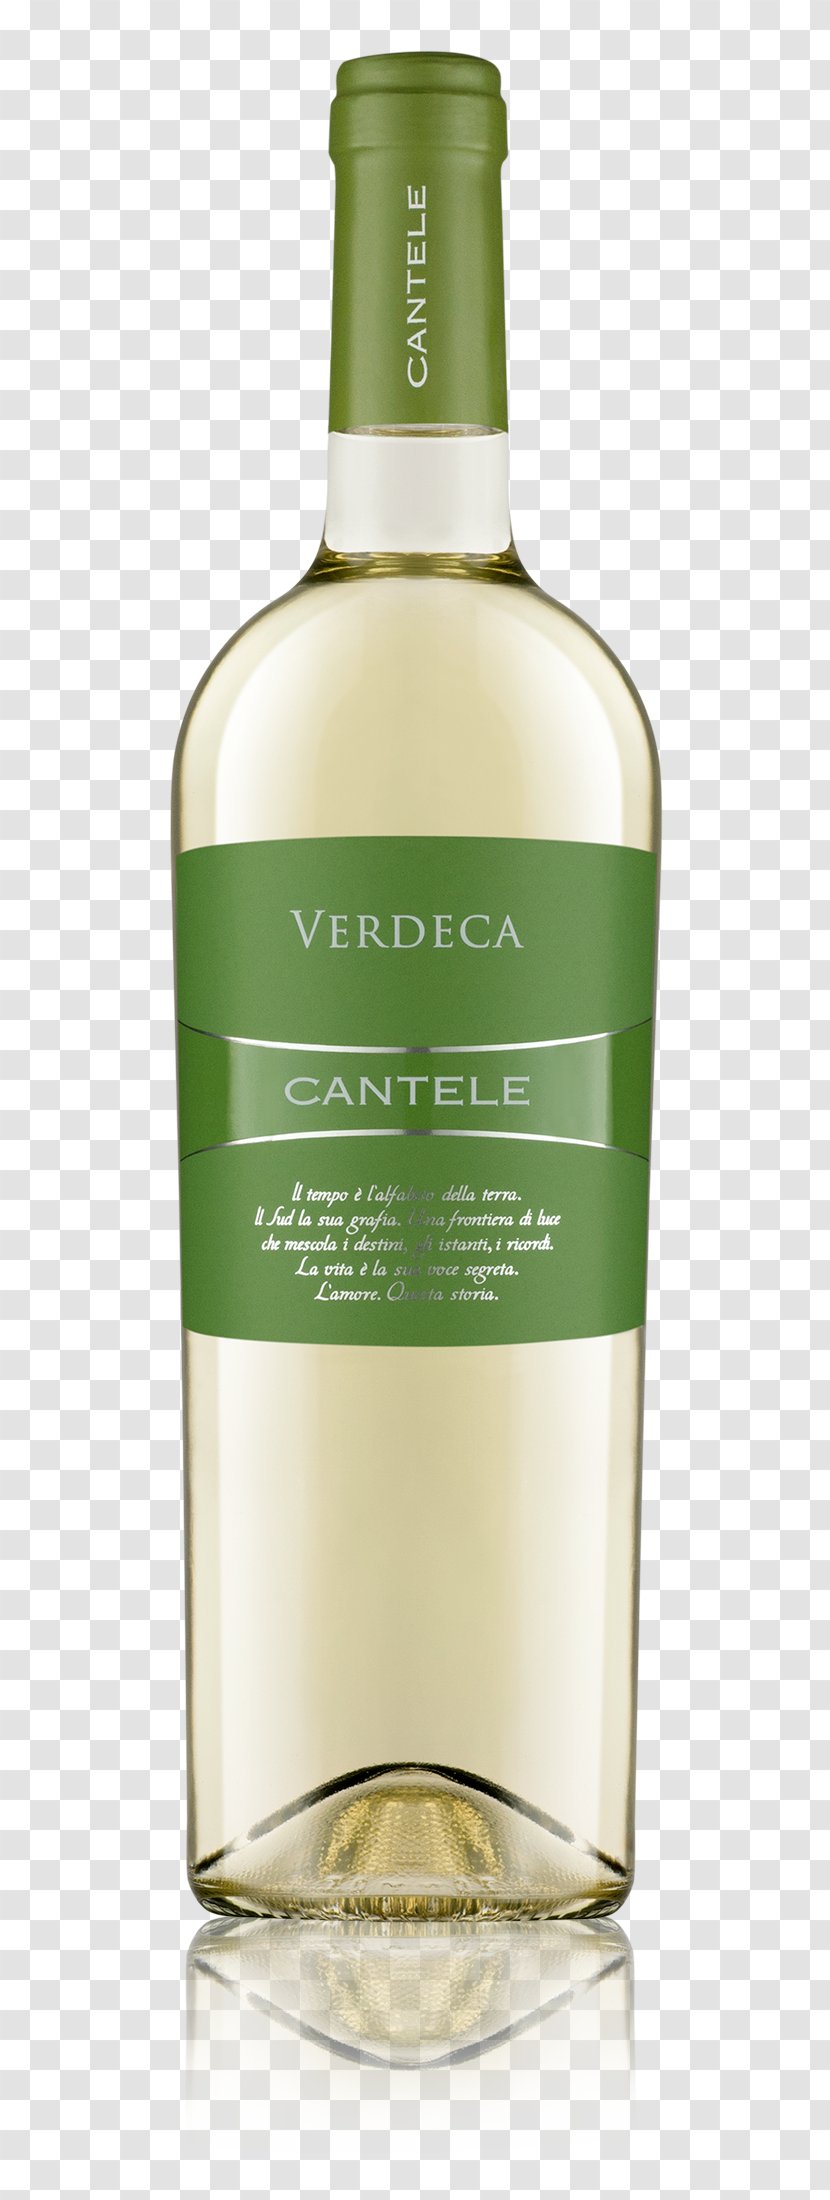 Cantele White Wine Chardonnay Fiano - Glass Bottle Transparent PNG